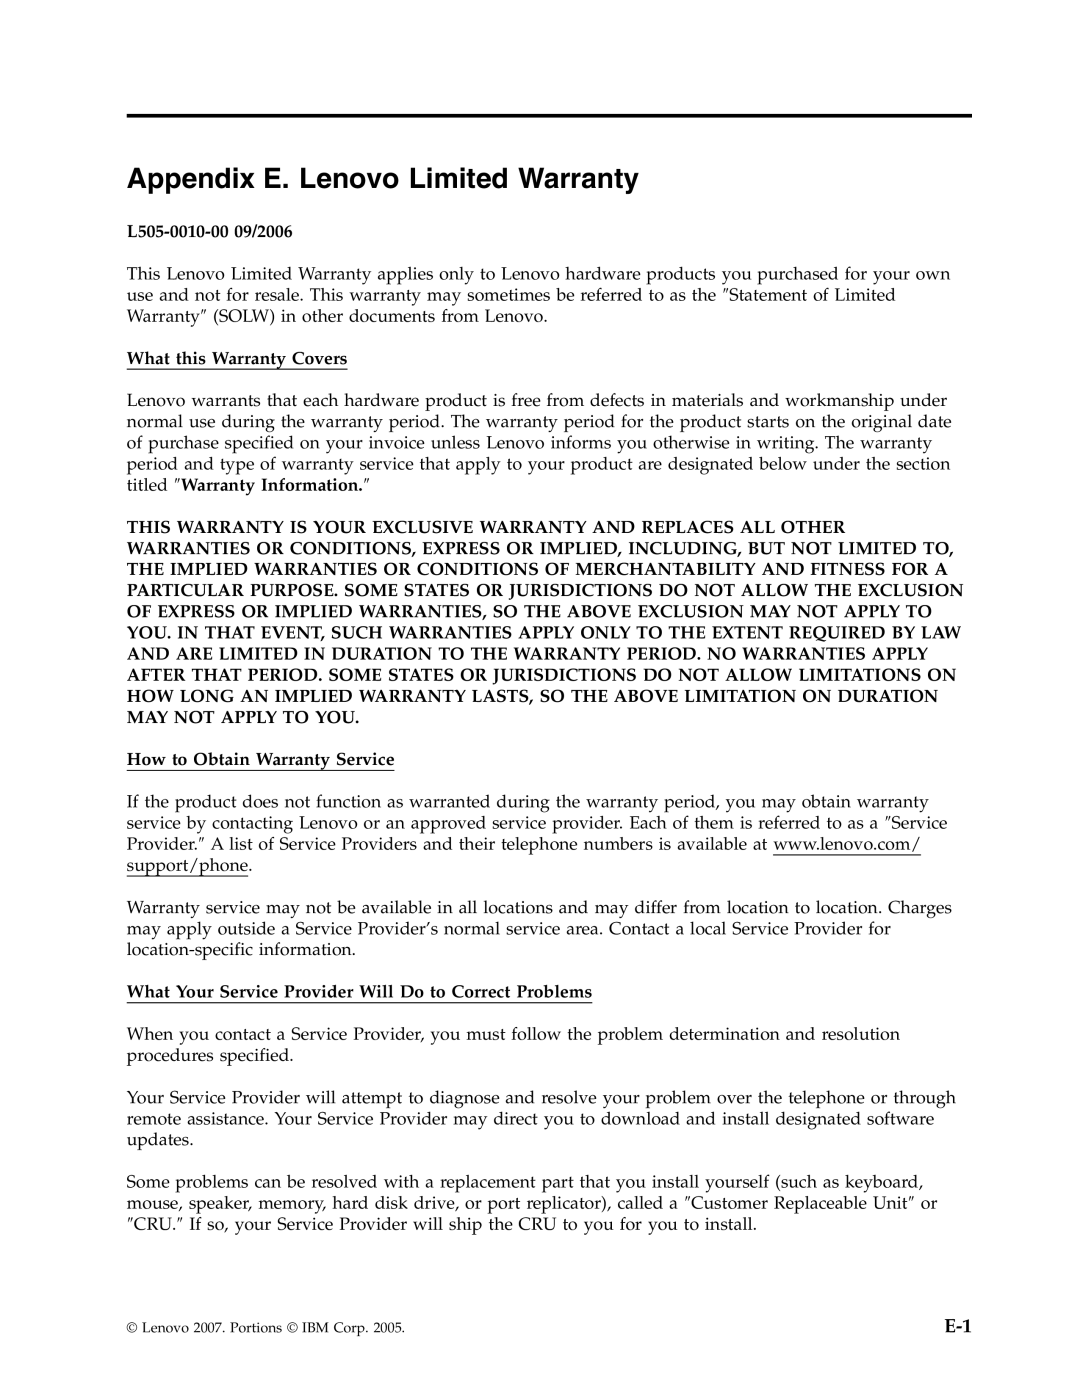 Lenovo 43N3201 manual Appendix E. Lenovo Limited Warranty, L505-0010-0009/2006, What this Warranty Covers 